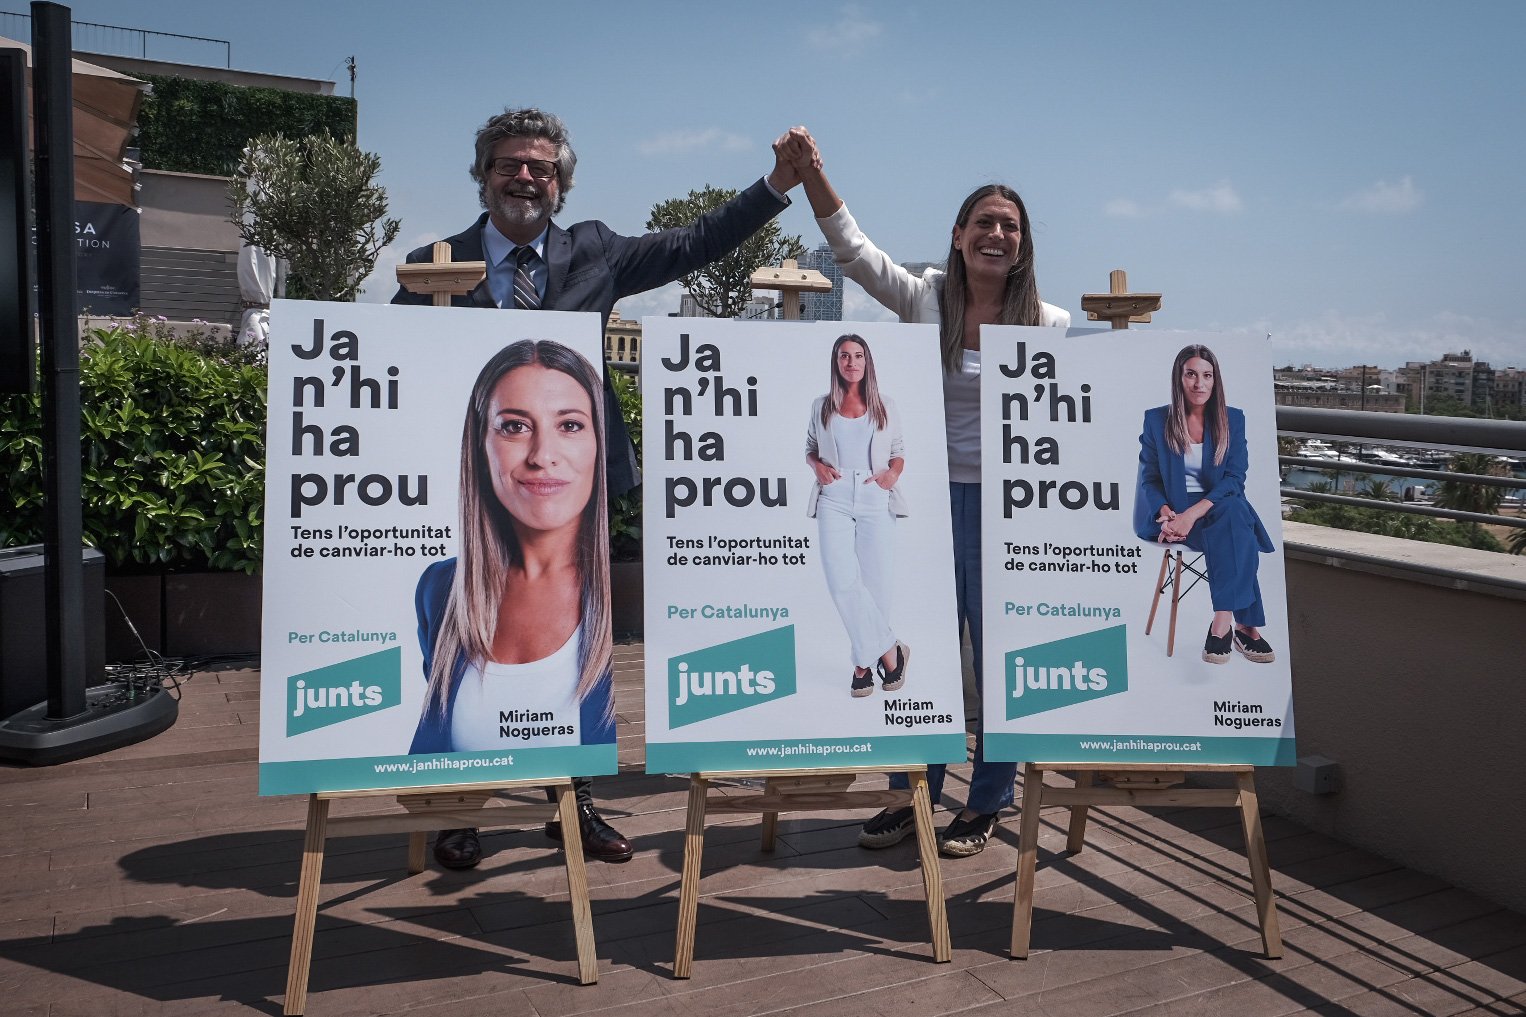 "Enough is enough": Junts launches slogan demanding an end to "giving away" Catalan votes